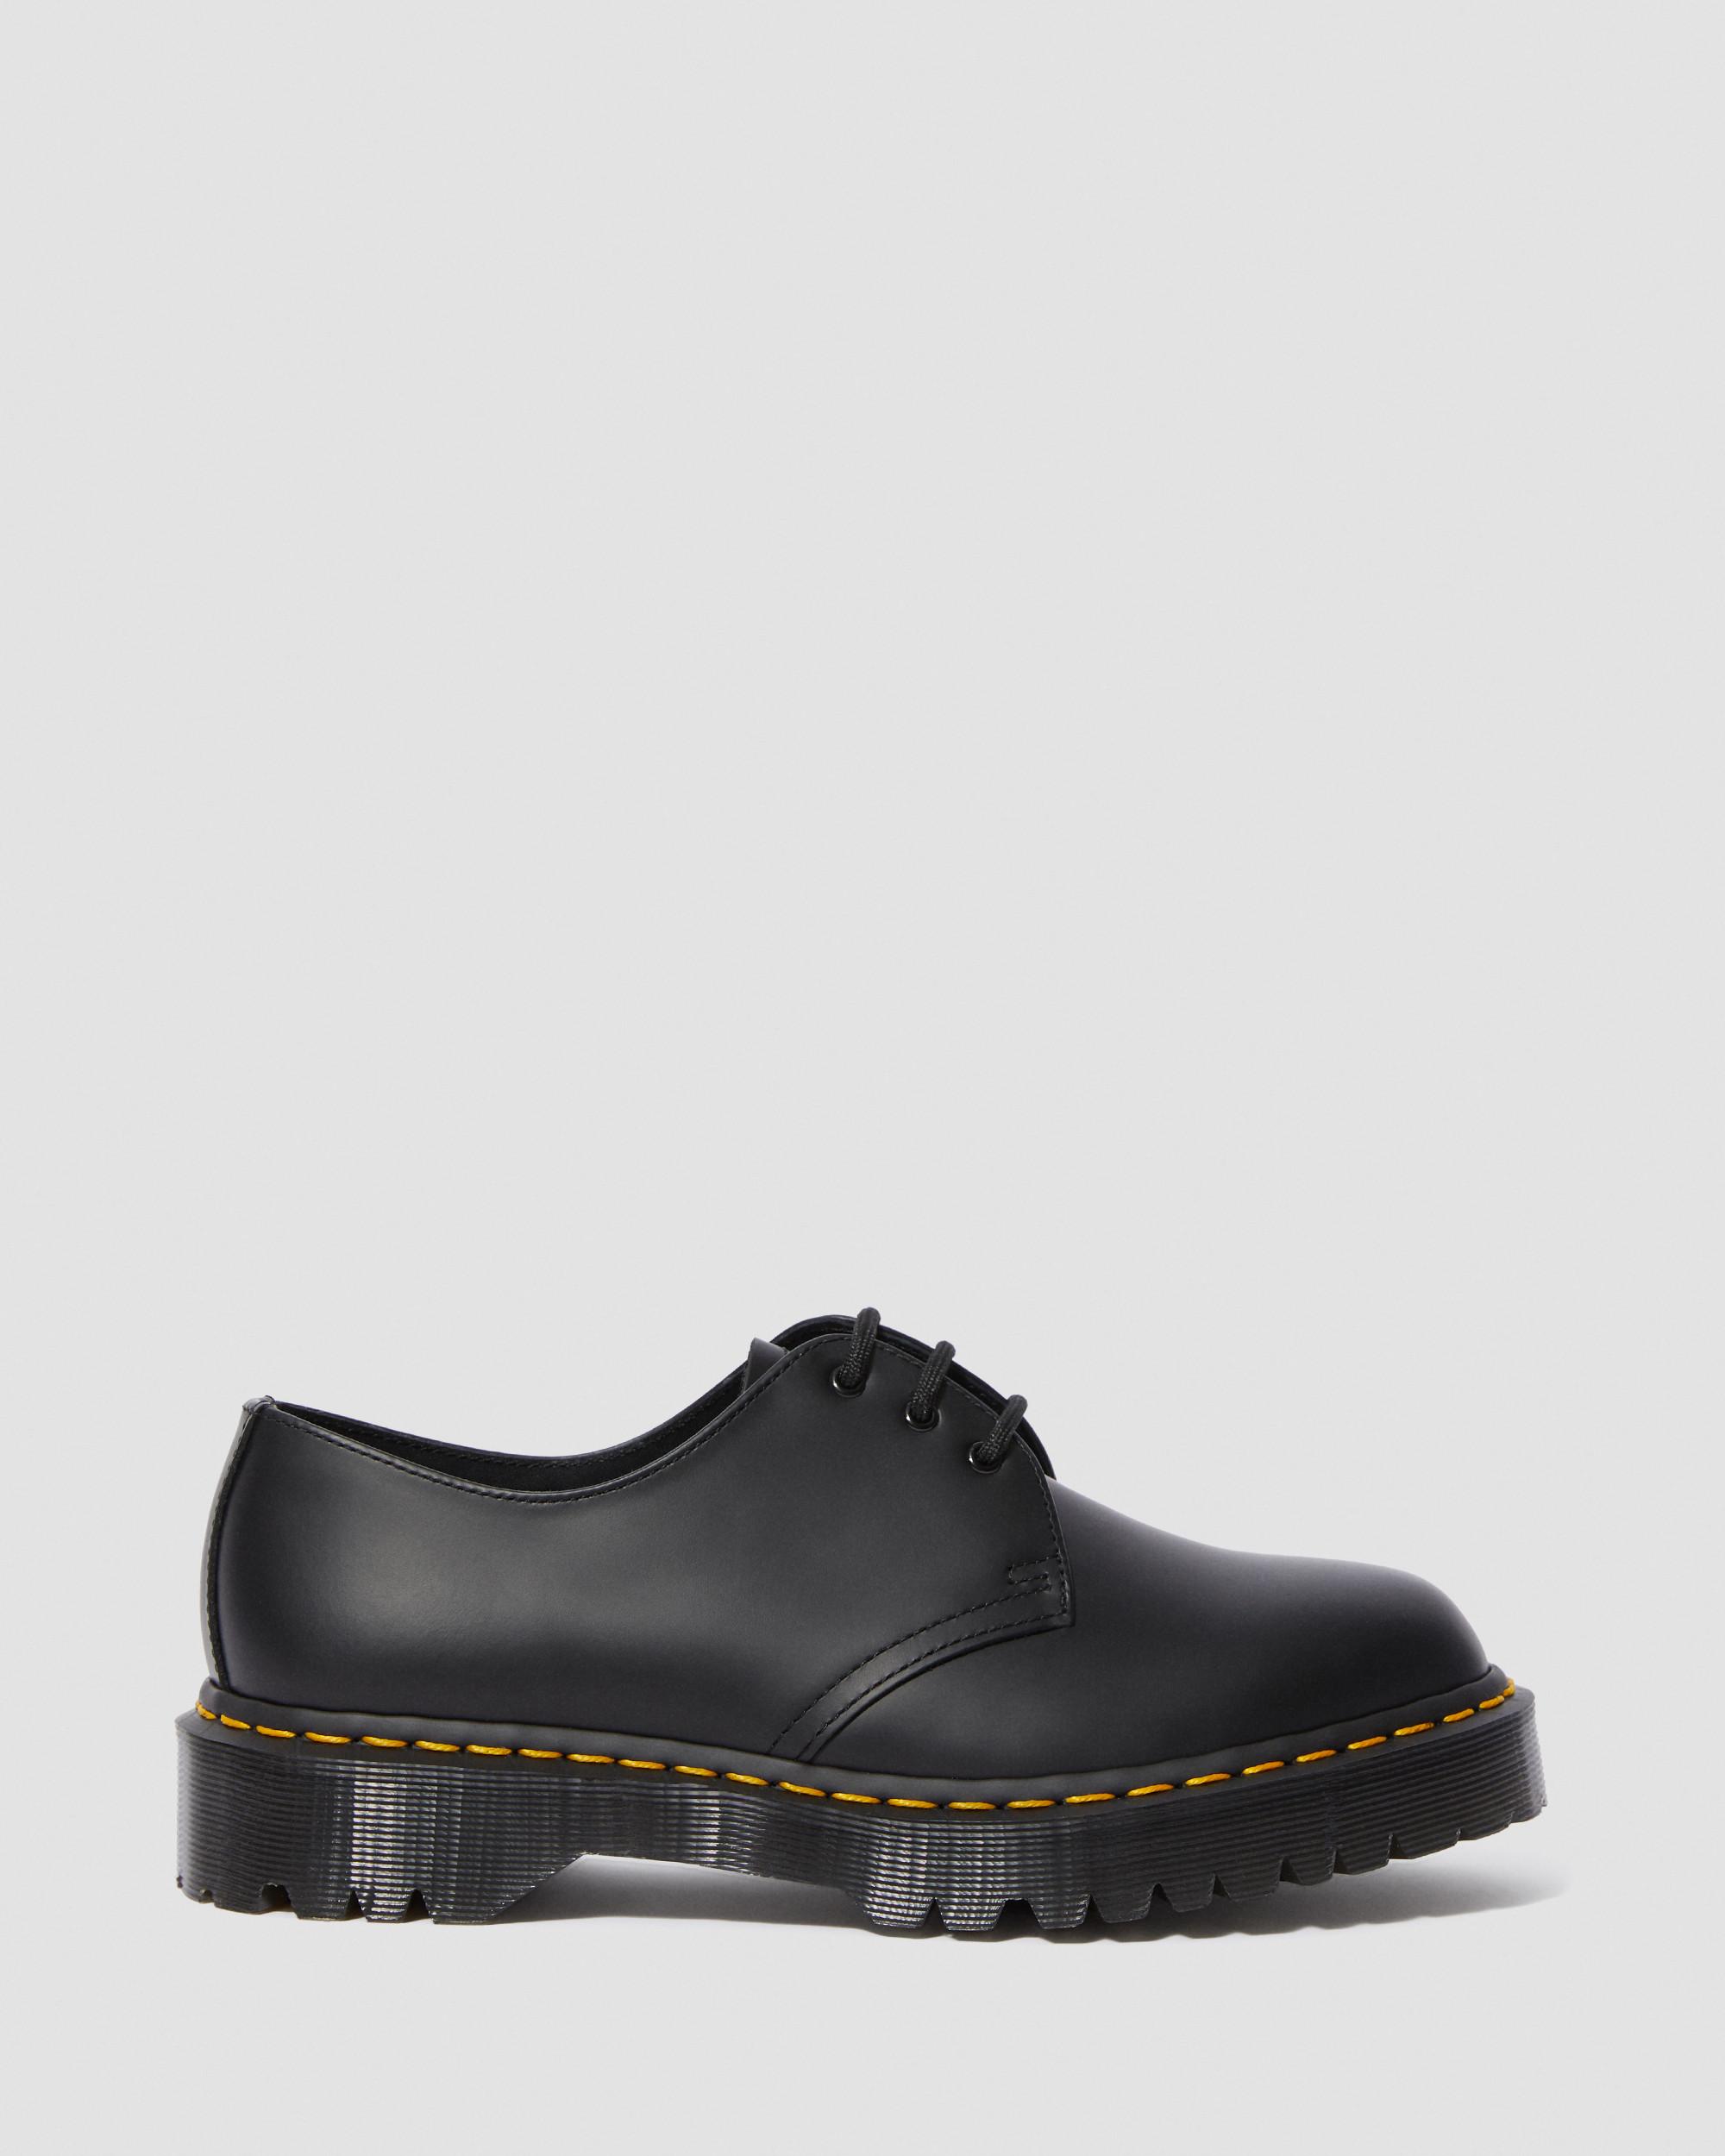 Dr Martens 1461 Bex Smooth Chaussures Mixte Adulte